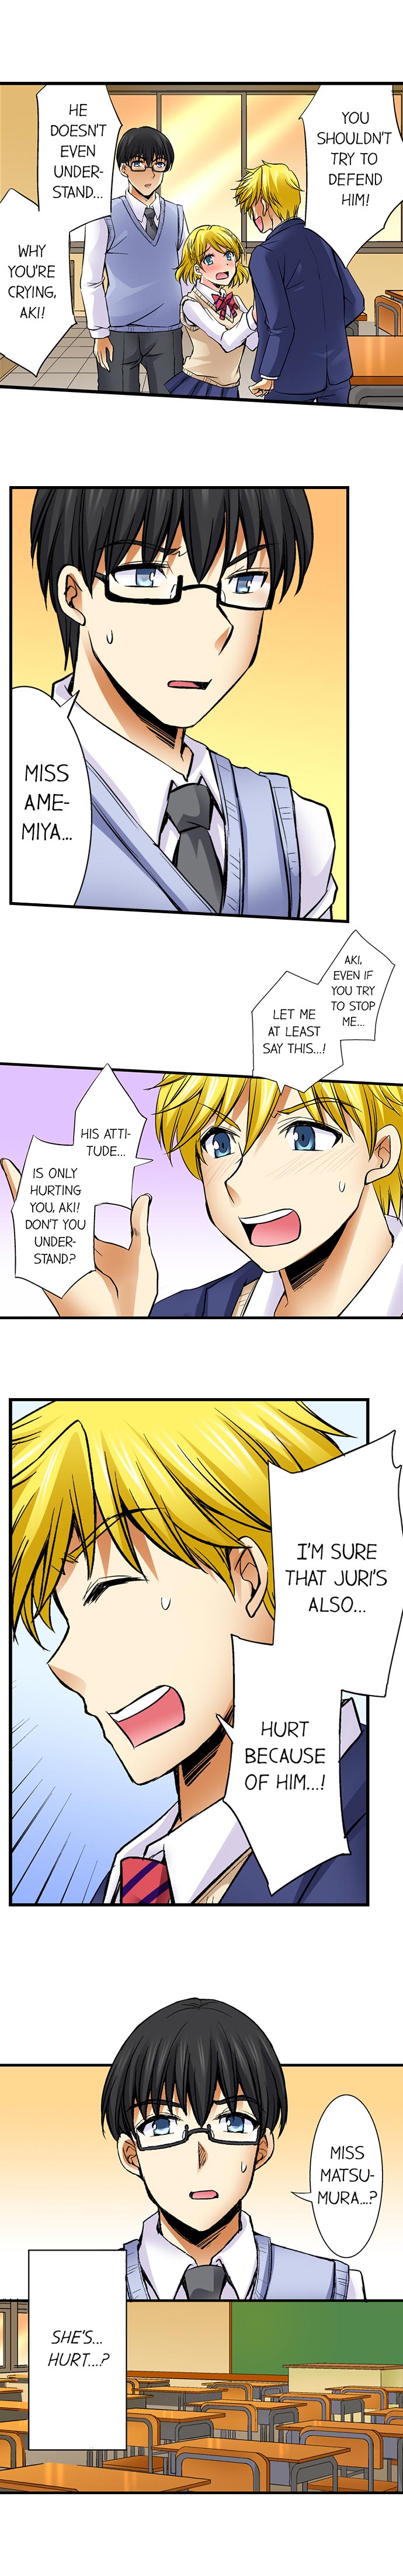 Why Can't i Have Sex With My Teacher? - Chapter 28 Page 8